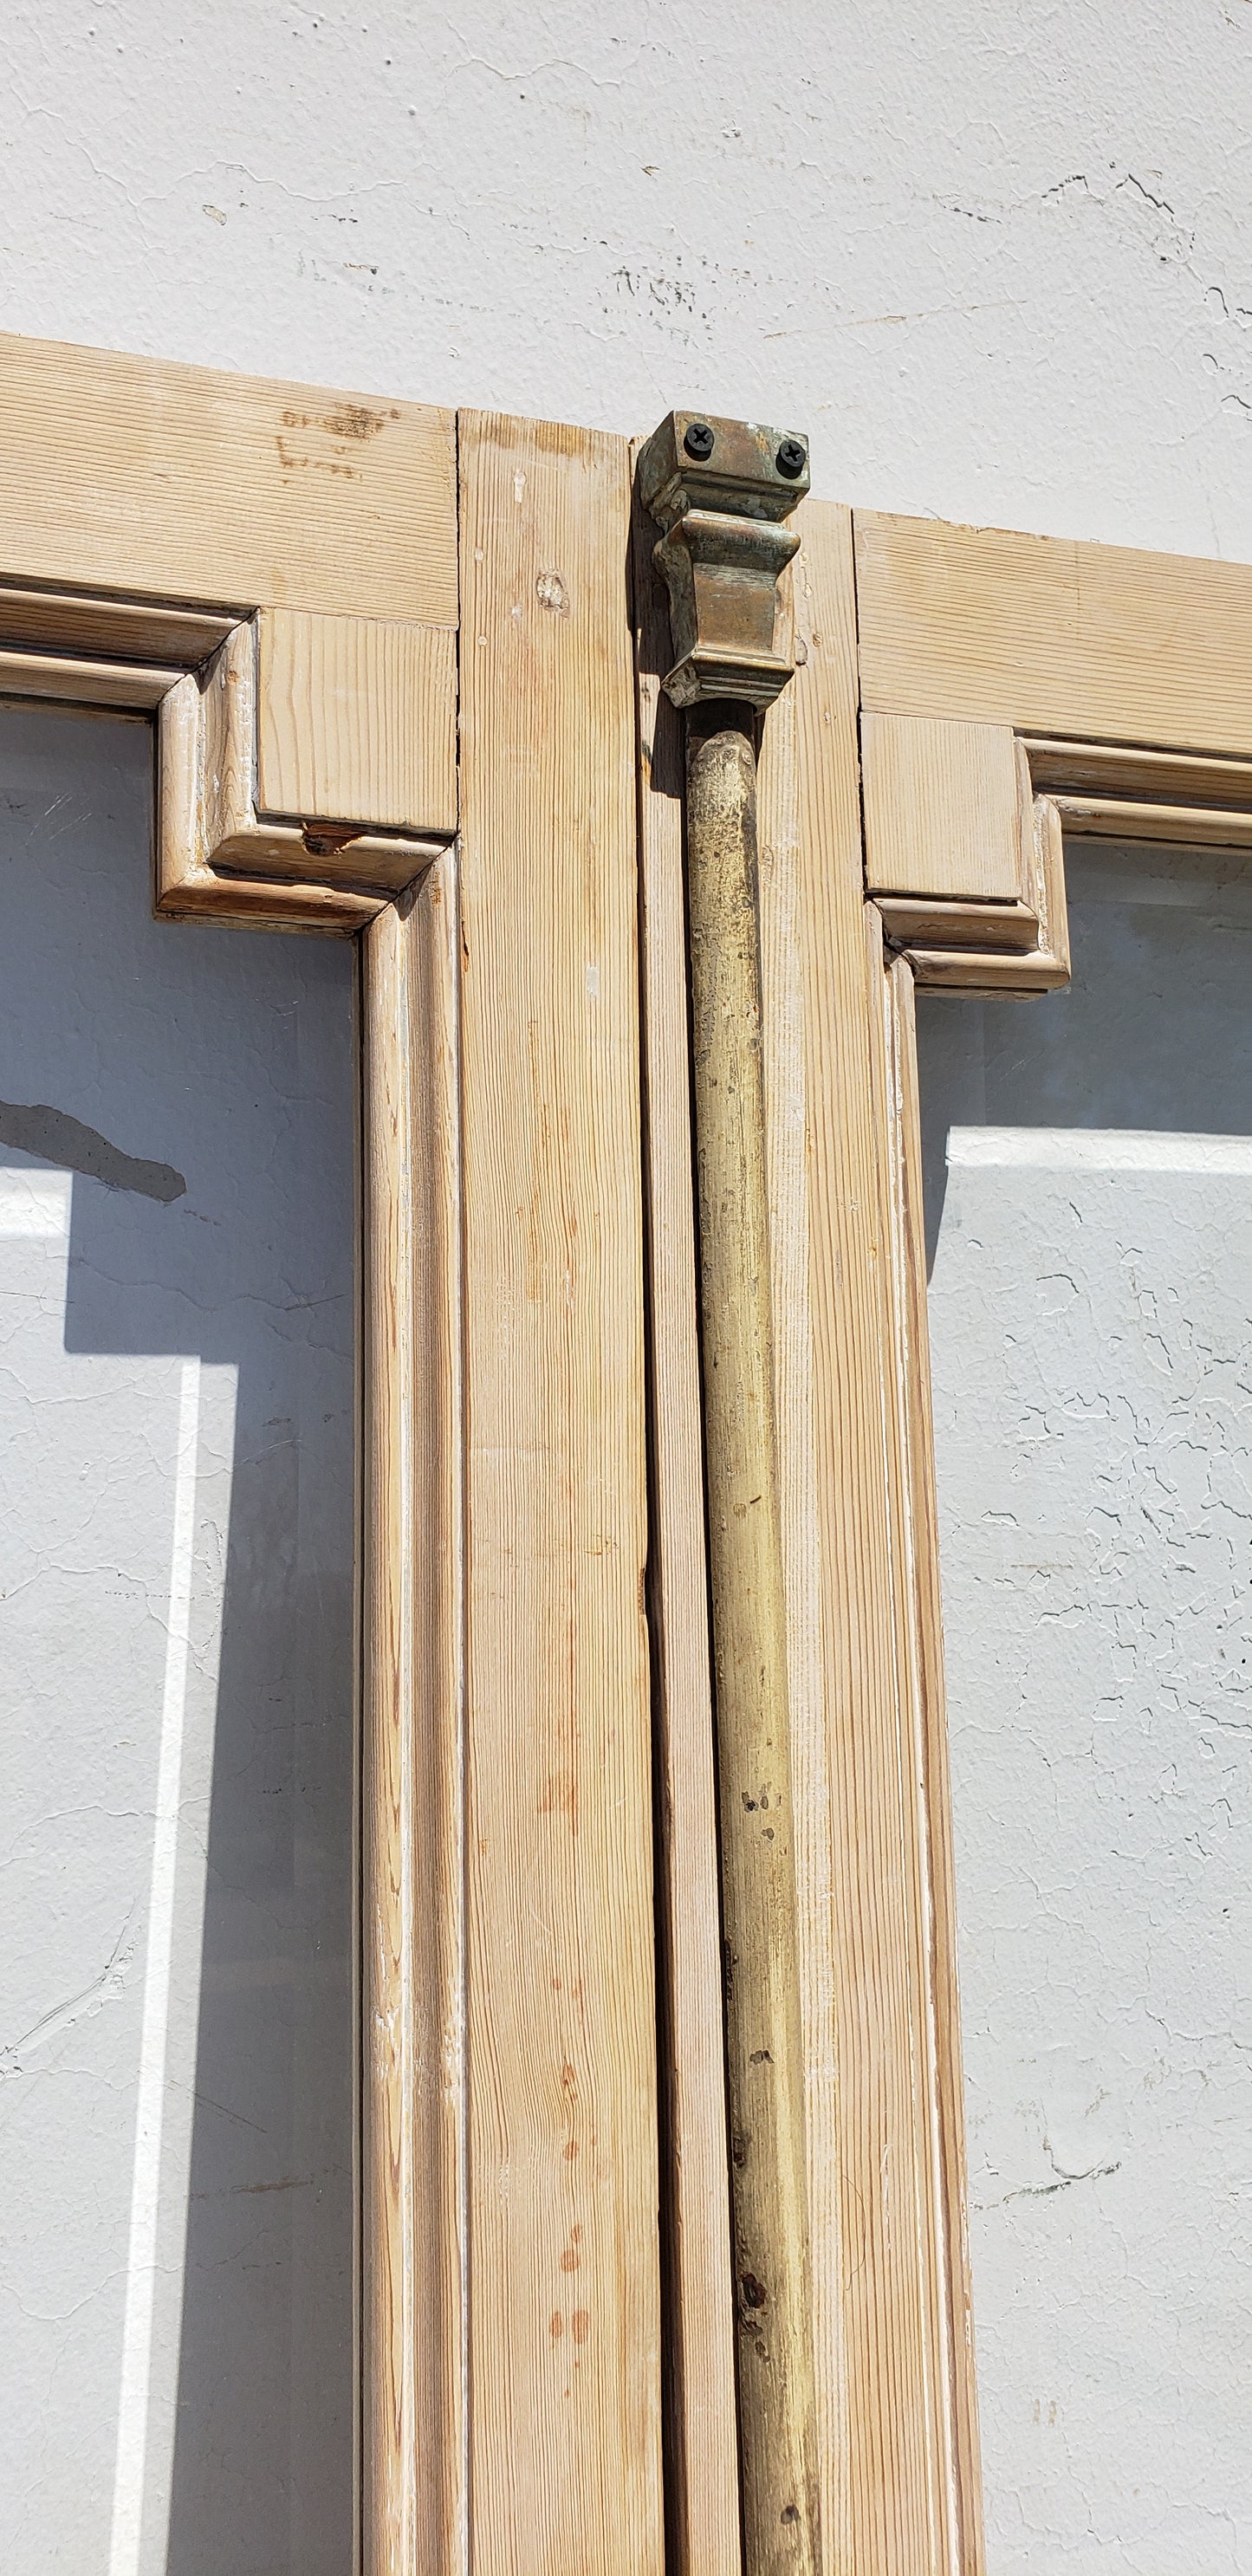 Pair of Antique Rectangle Natural Wood Windows